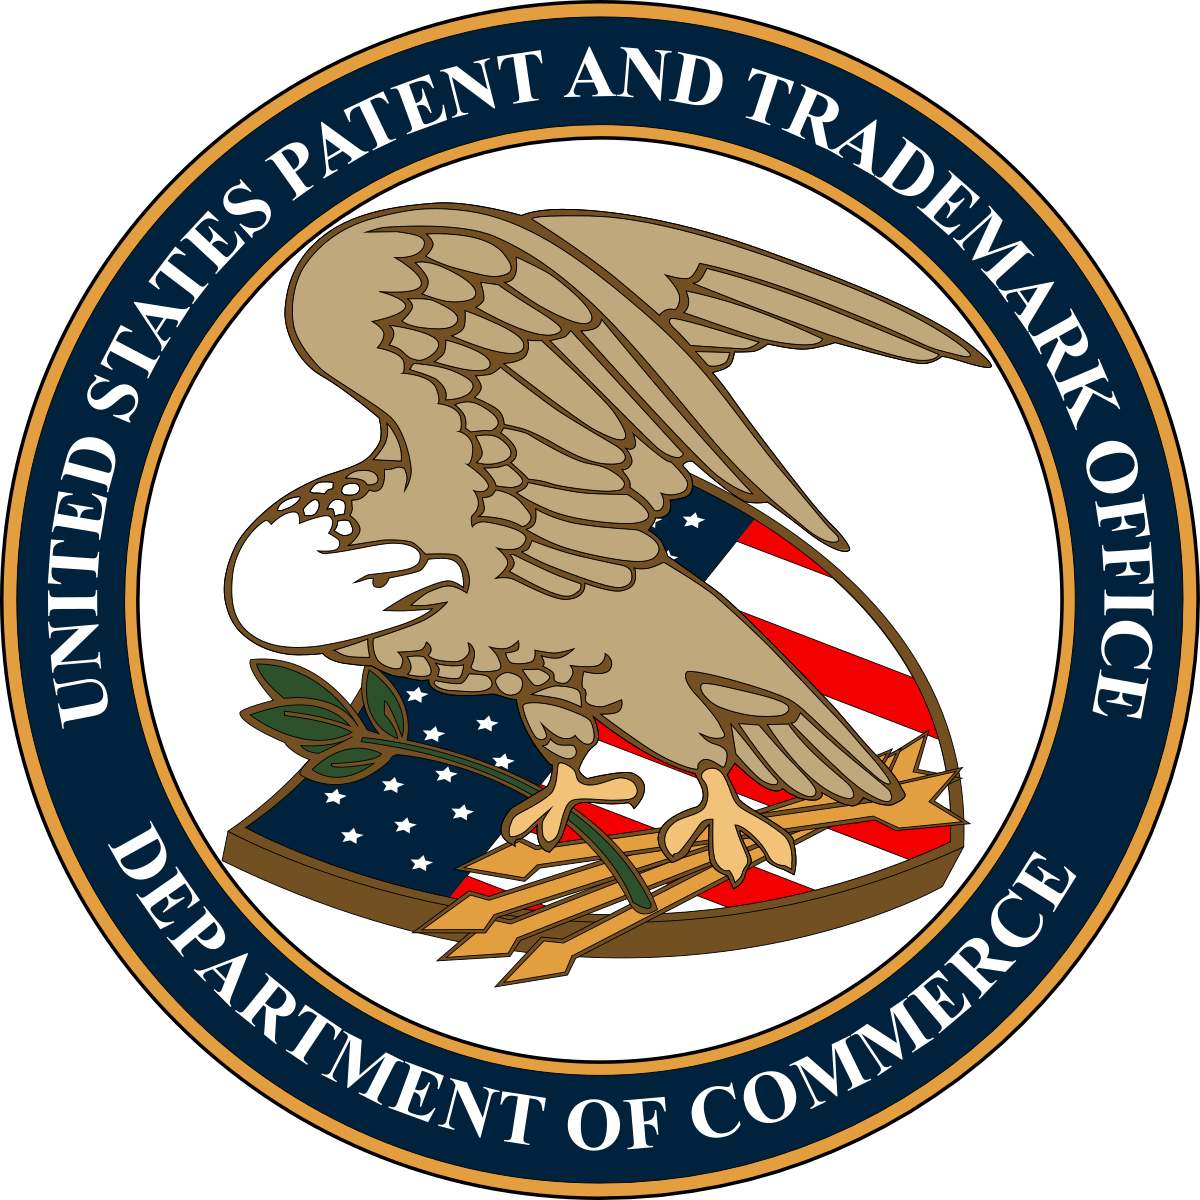 The United States Patent and Trademark Office (USPTO) Logo